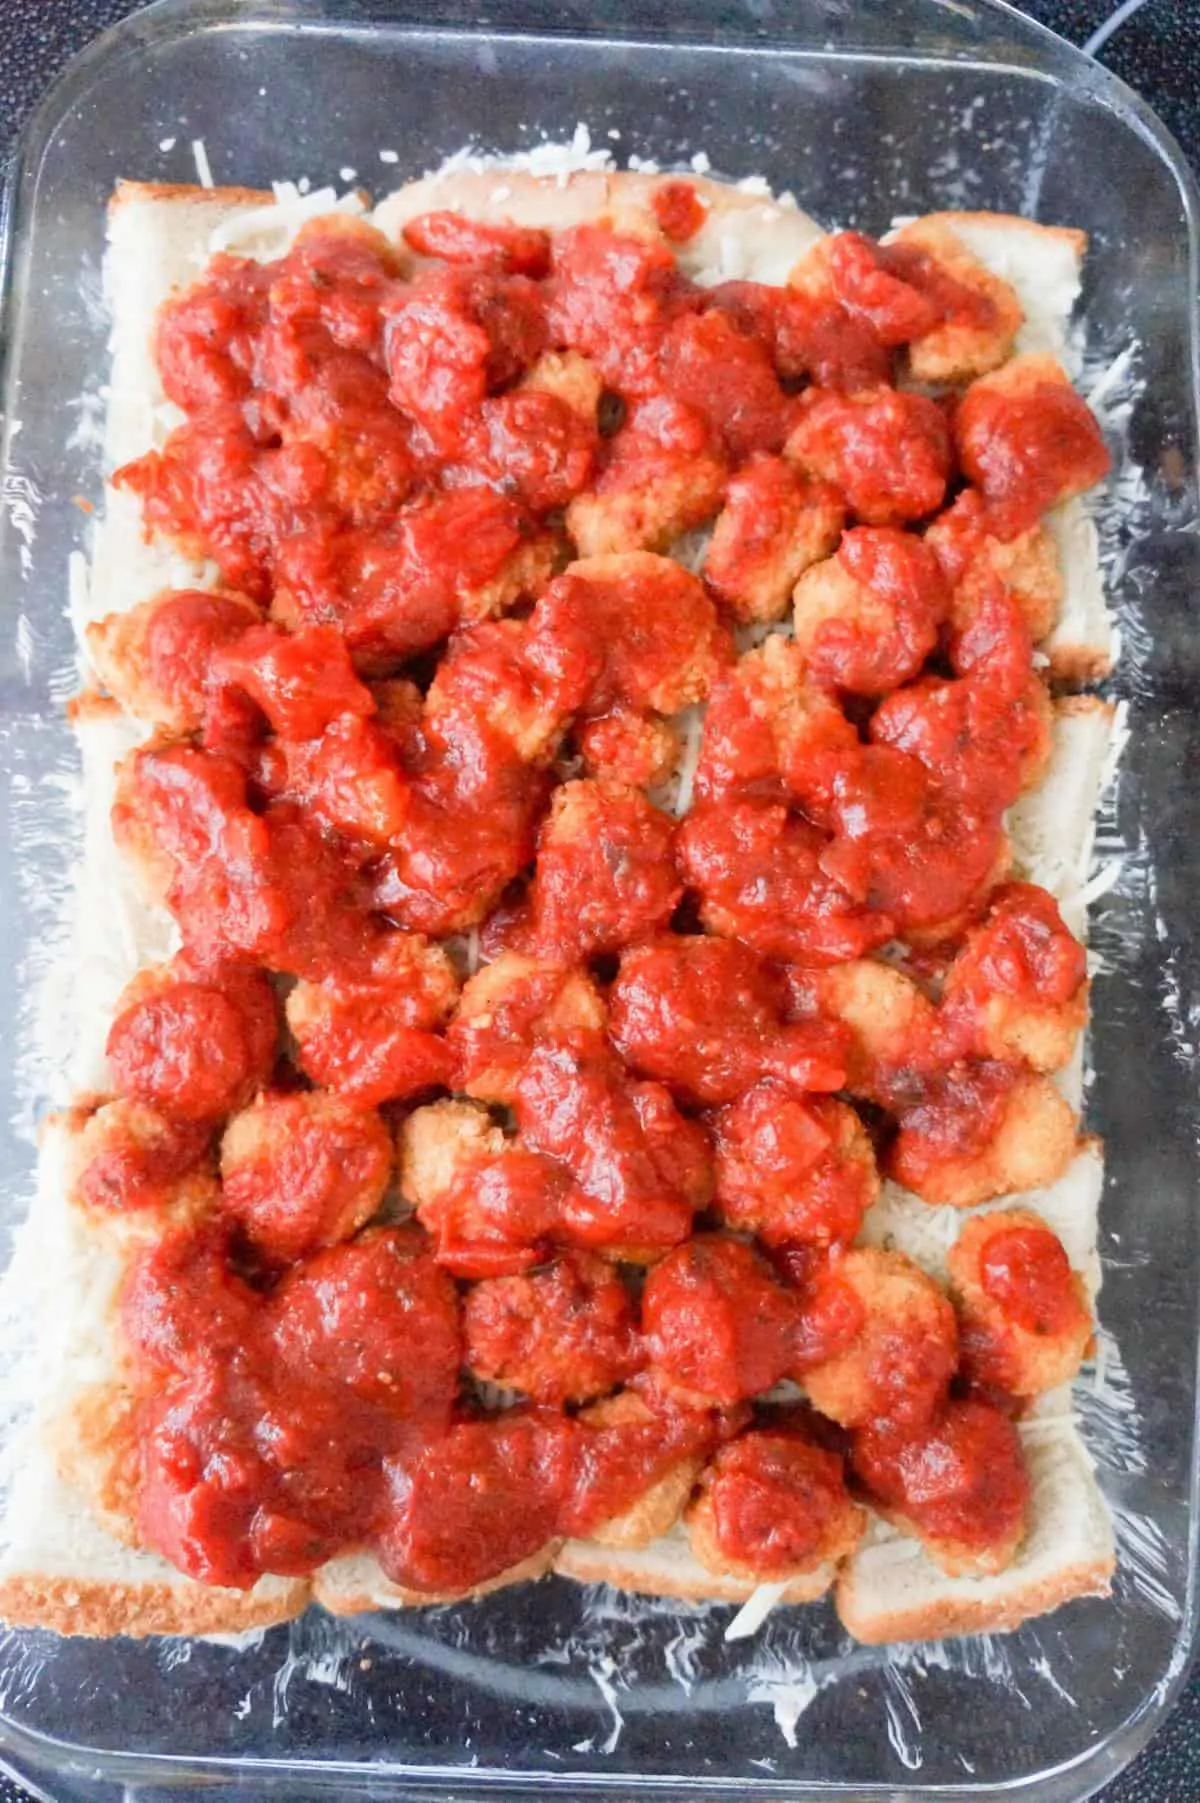 marinara sauce on top of popcorn chicken and bread in a baking dish